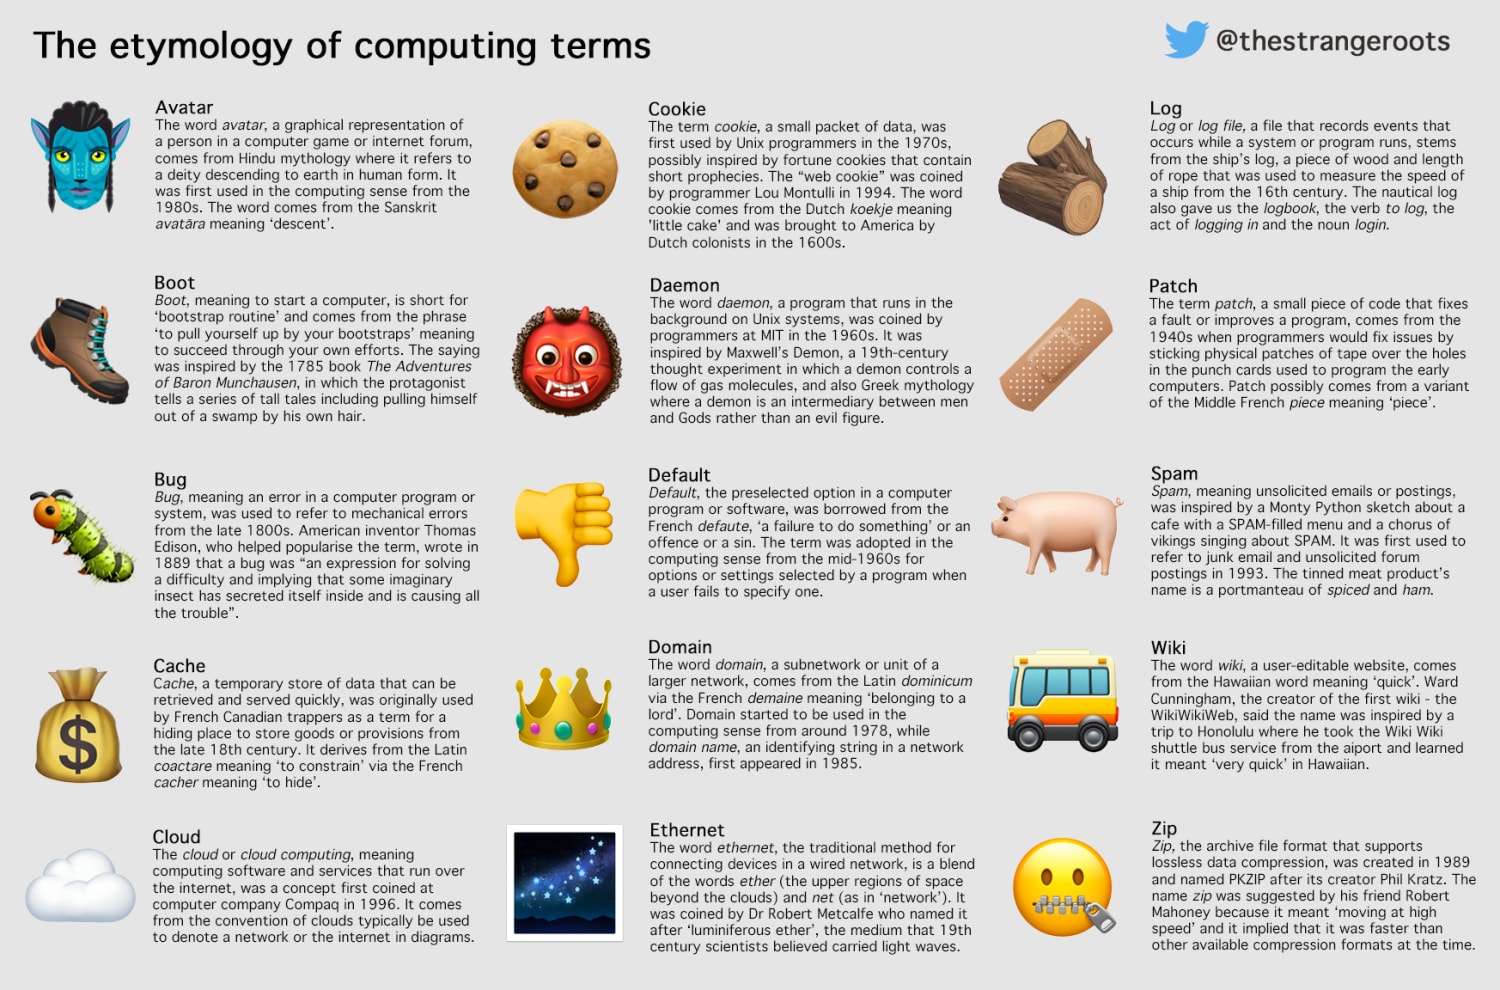 The etymology of general computing terms (featuring avatar, boot, cookie, spam and wiki)